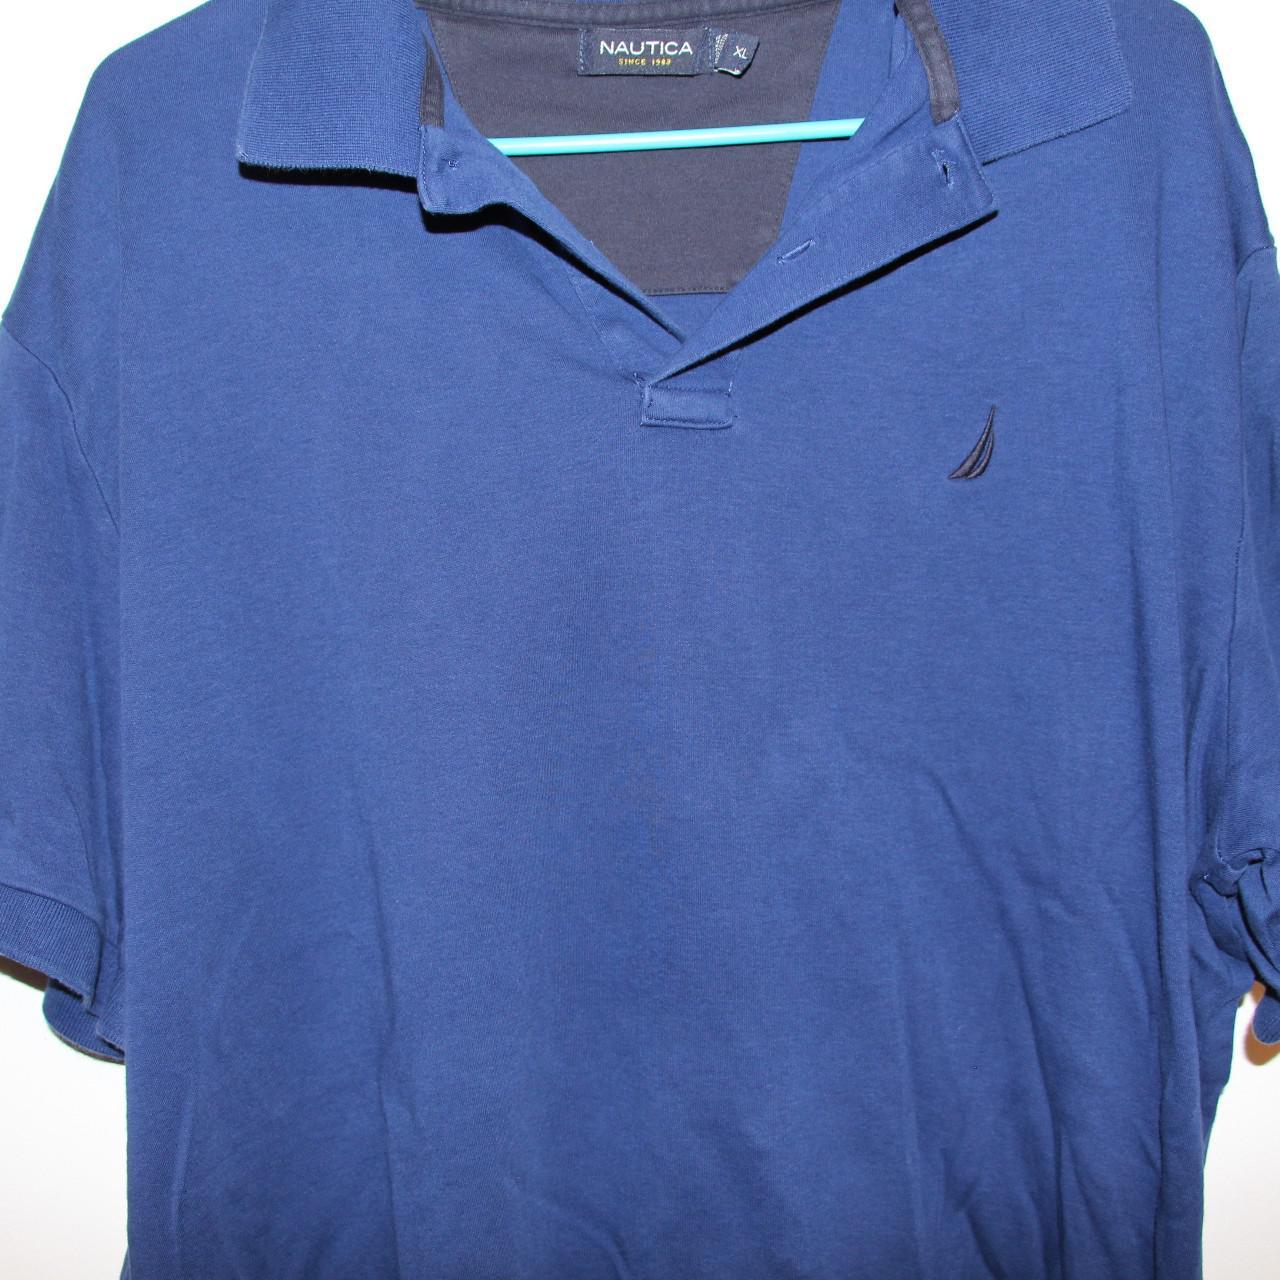 Product Image 3 - Dark Blue Polo Shirt
Great Condition